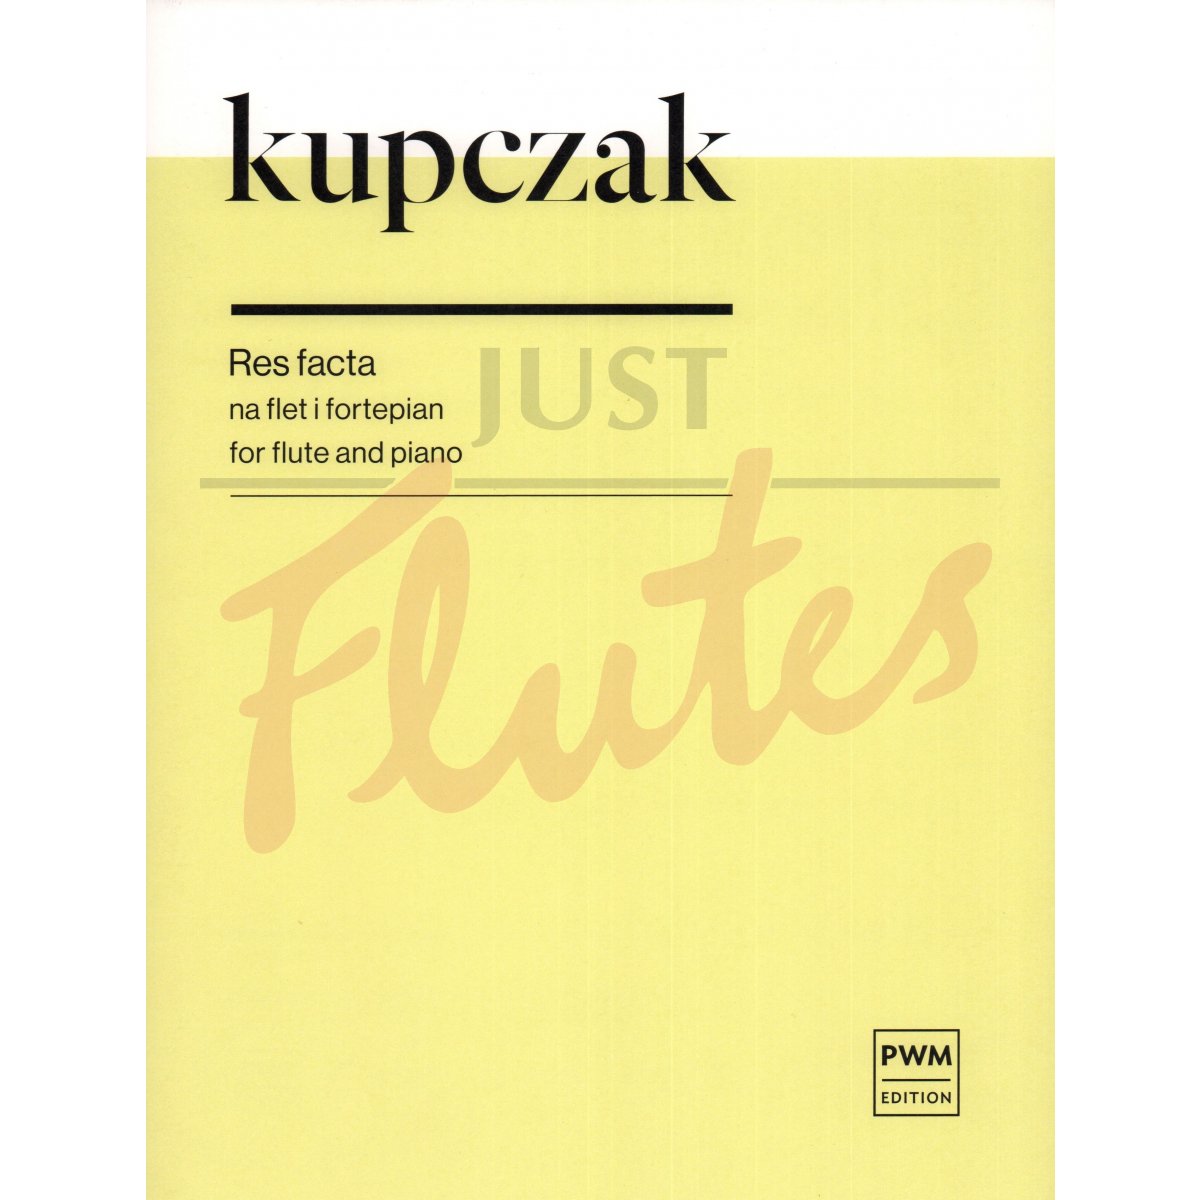 Res facta for Flute and Piano